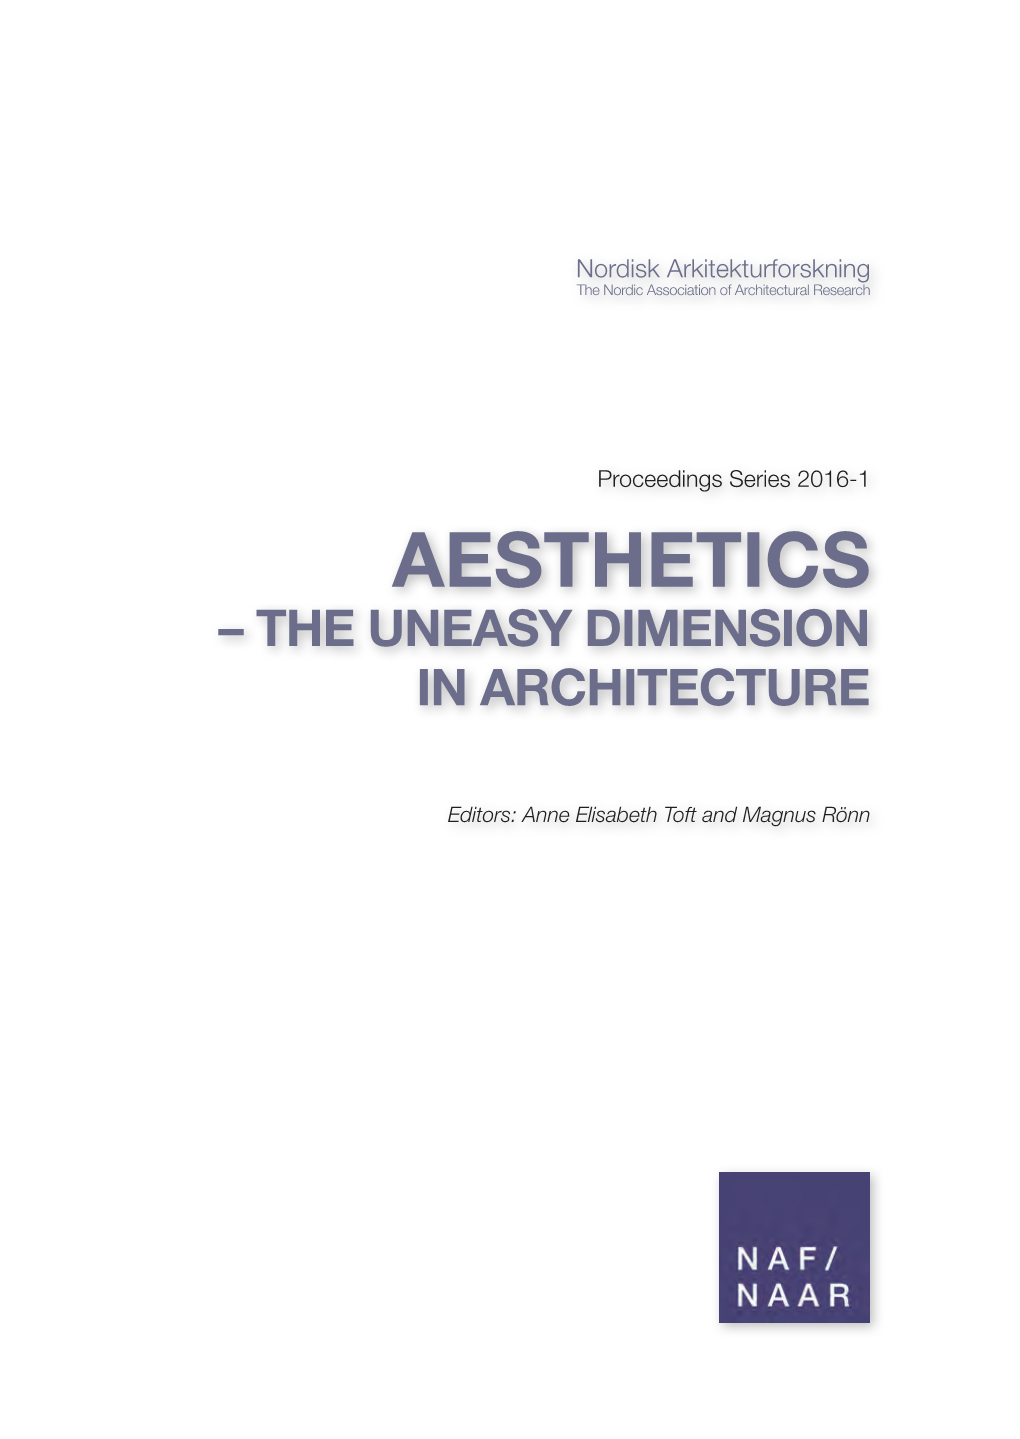 Aesthetics – the Uneasy Dimension in Architecture